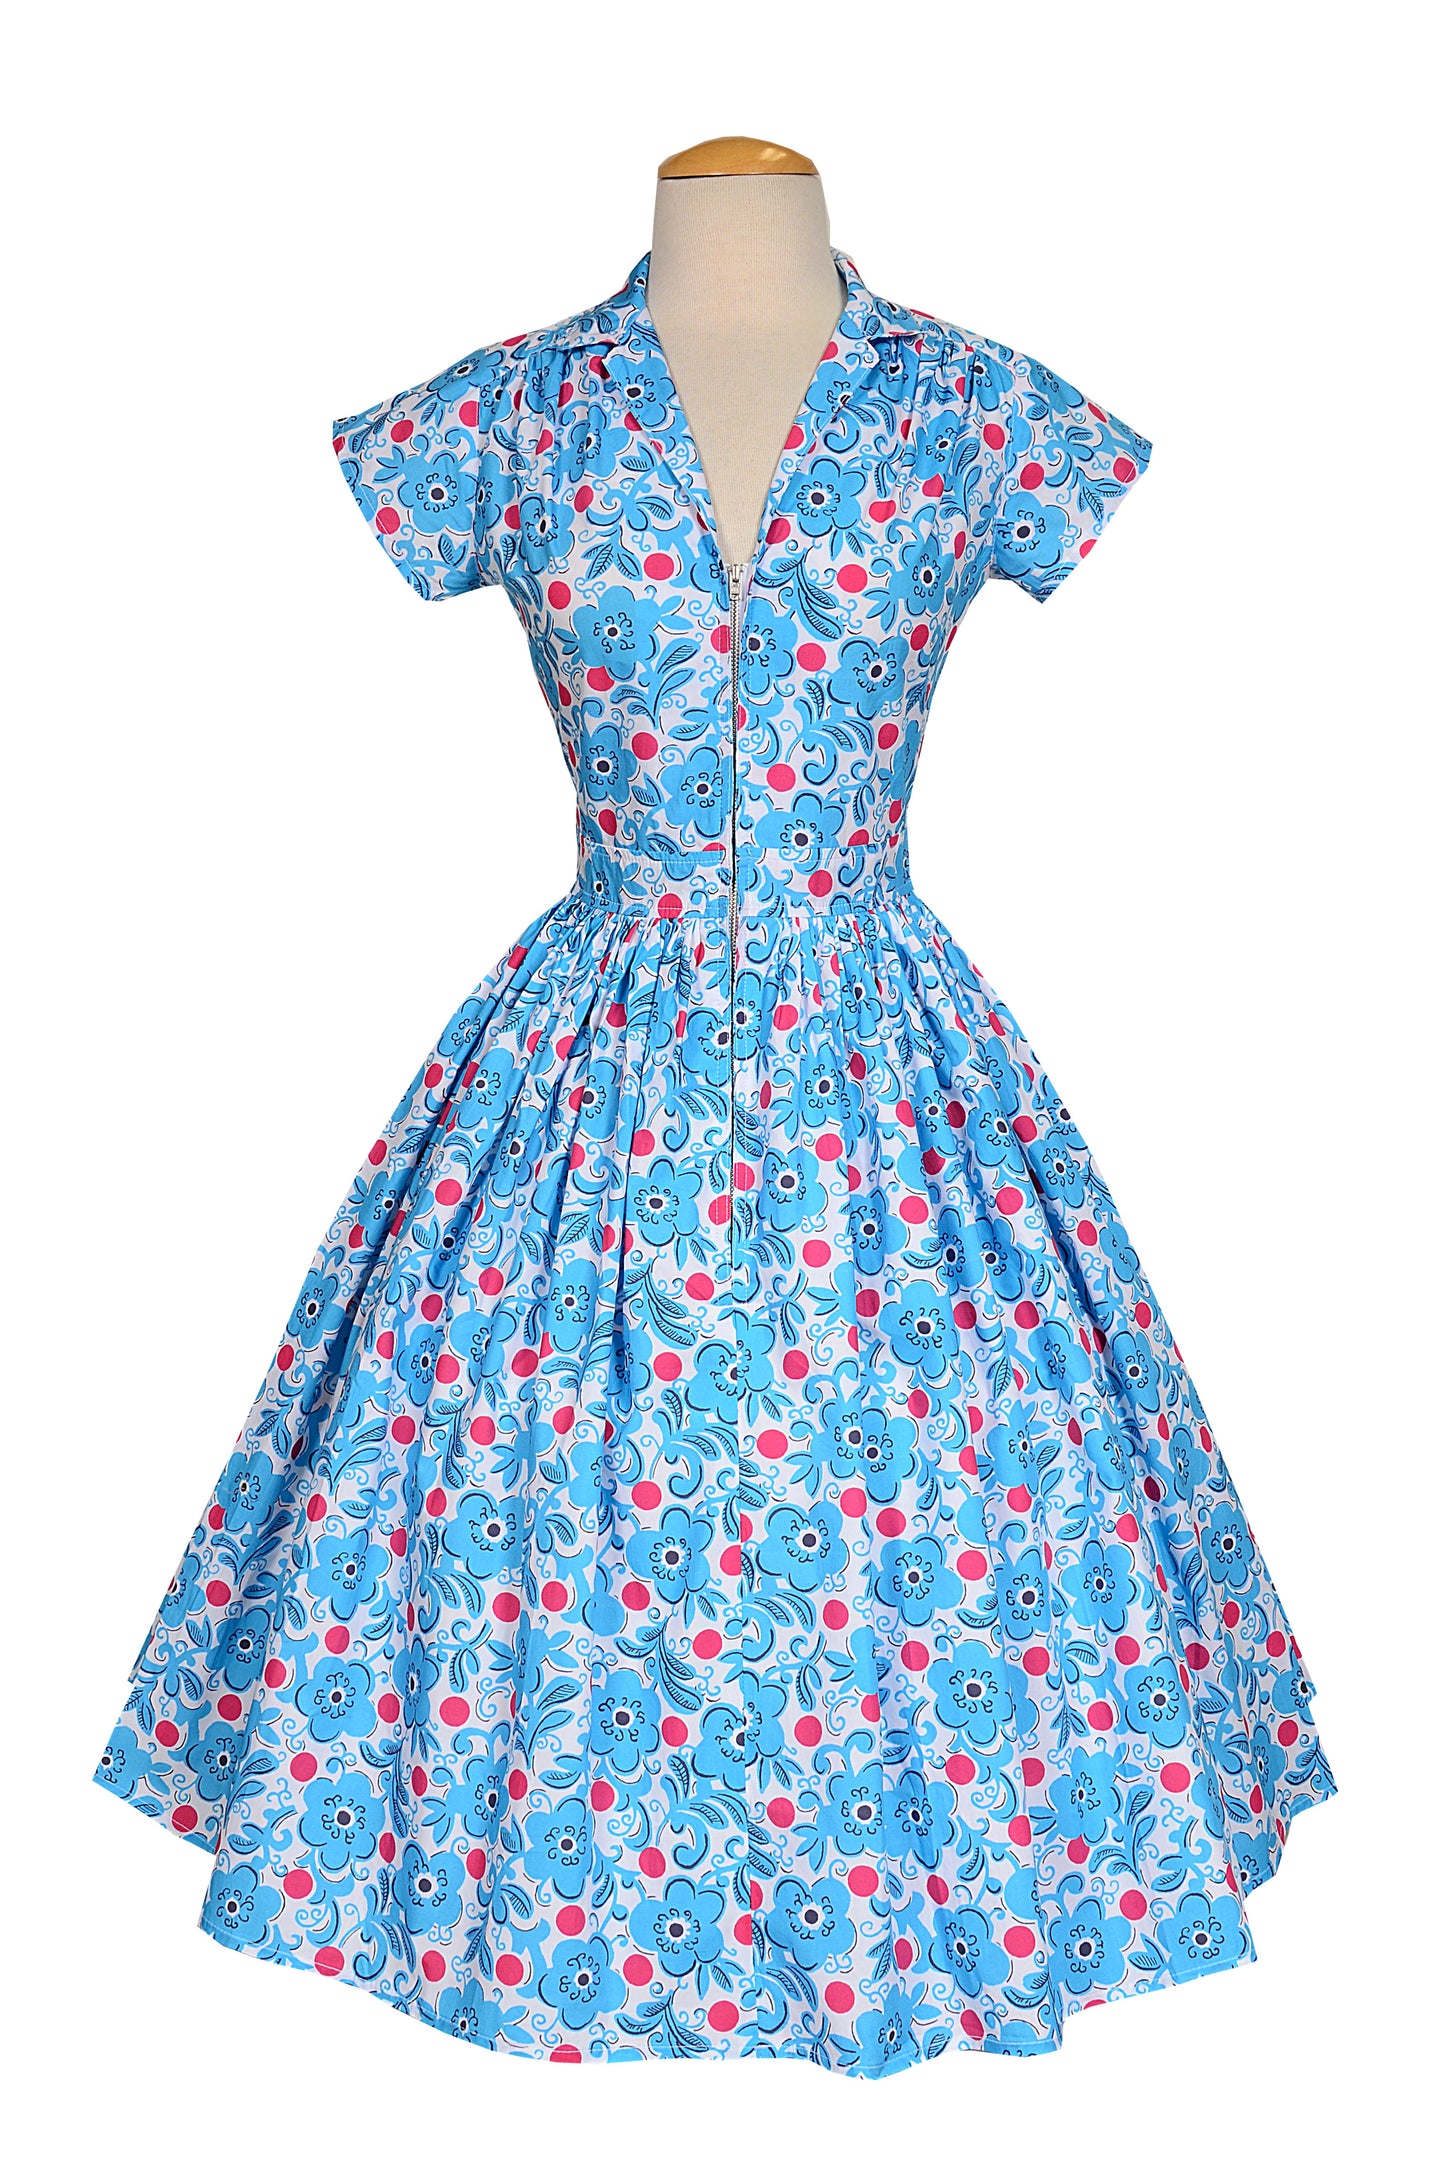 Joni Dress in Red Dot Floral